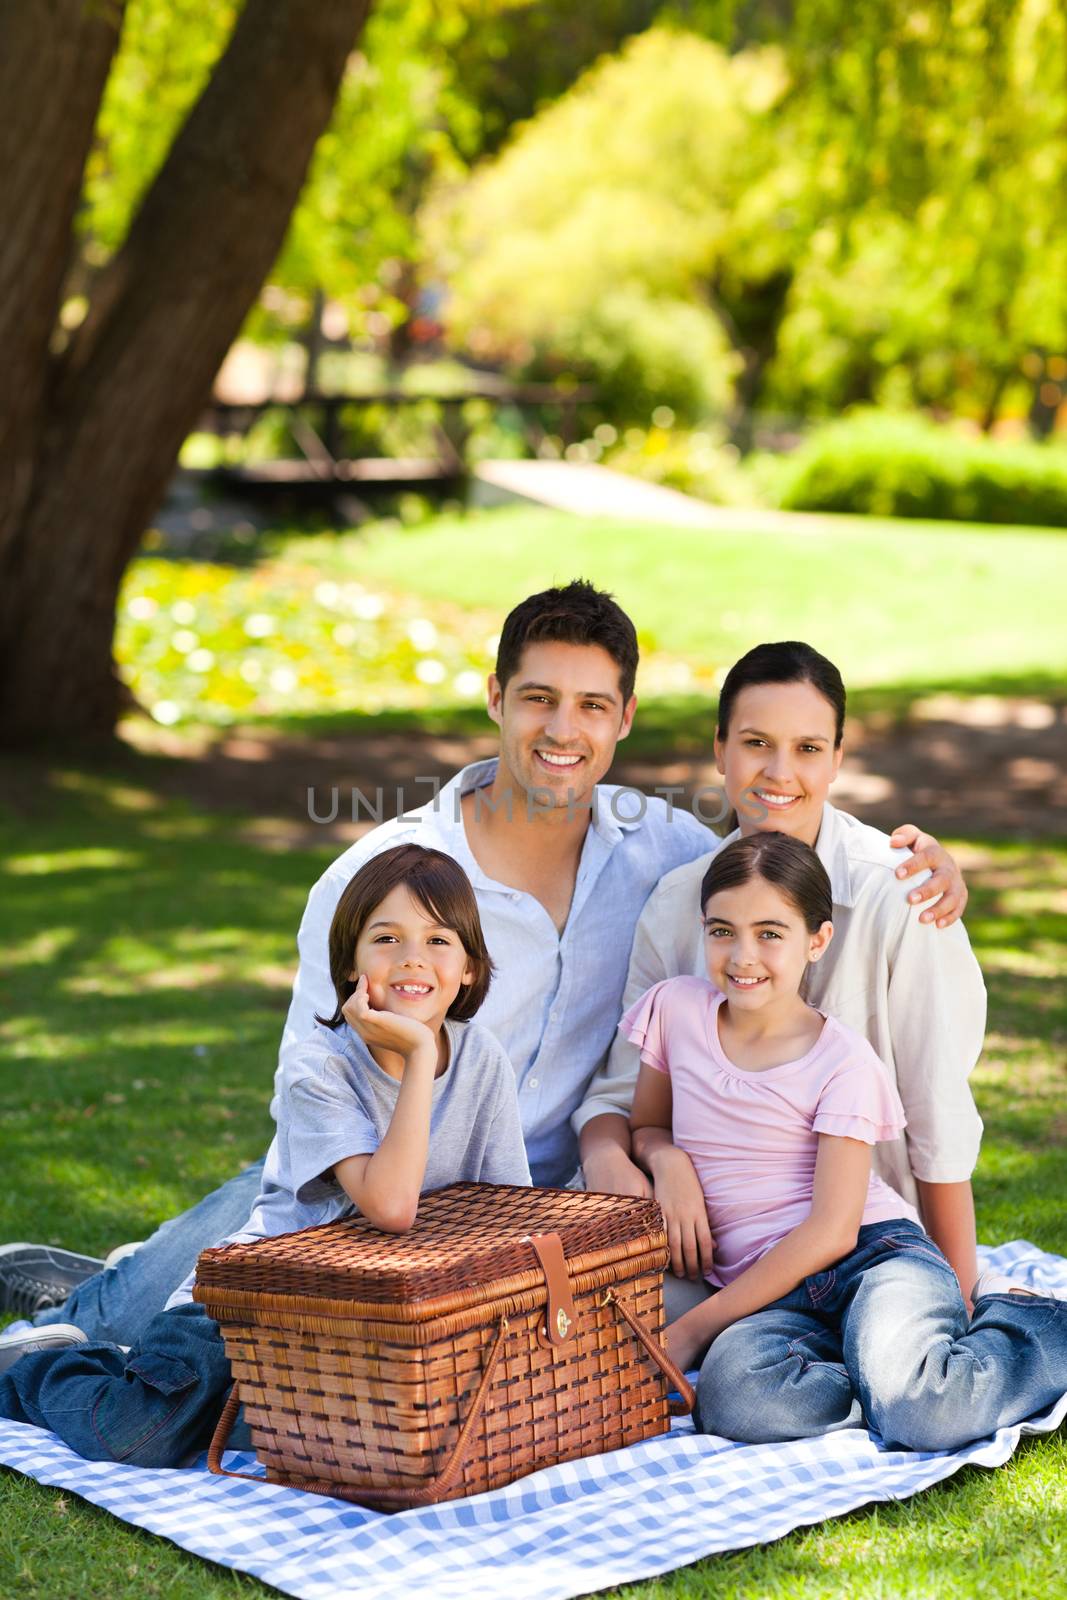 Family picnicking in the park by Wavebreakmedia